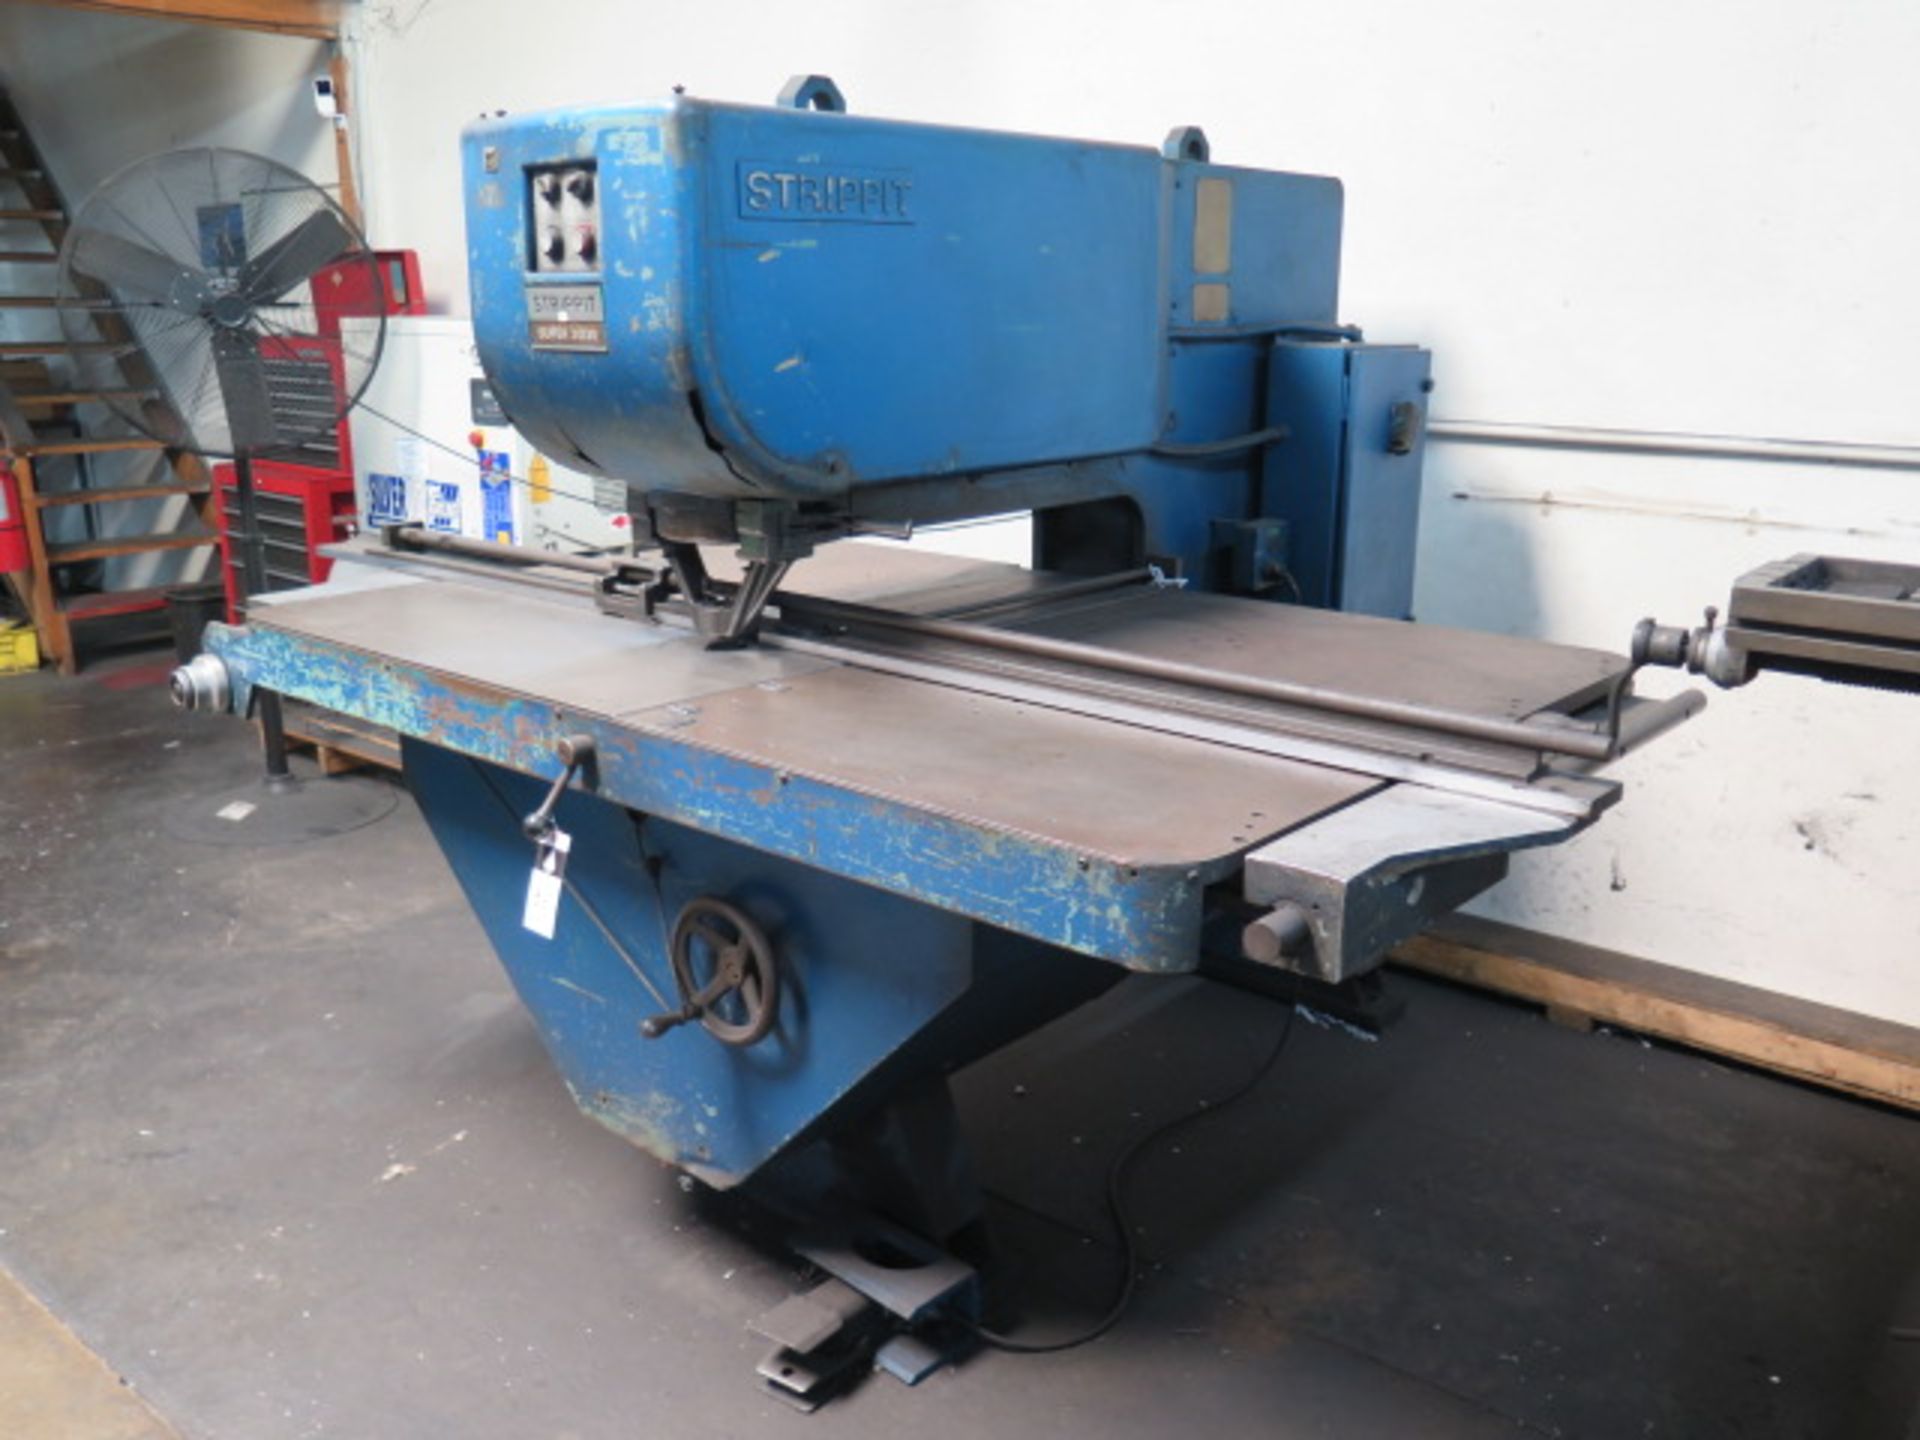 Strippit Super 30/30 Sheet Metal Fabrication Punch Press w/ Fence System (SOLD AS-IS - NO WARRANTY) - Image 3 of 18